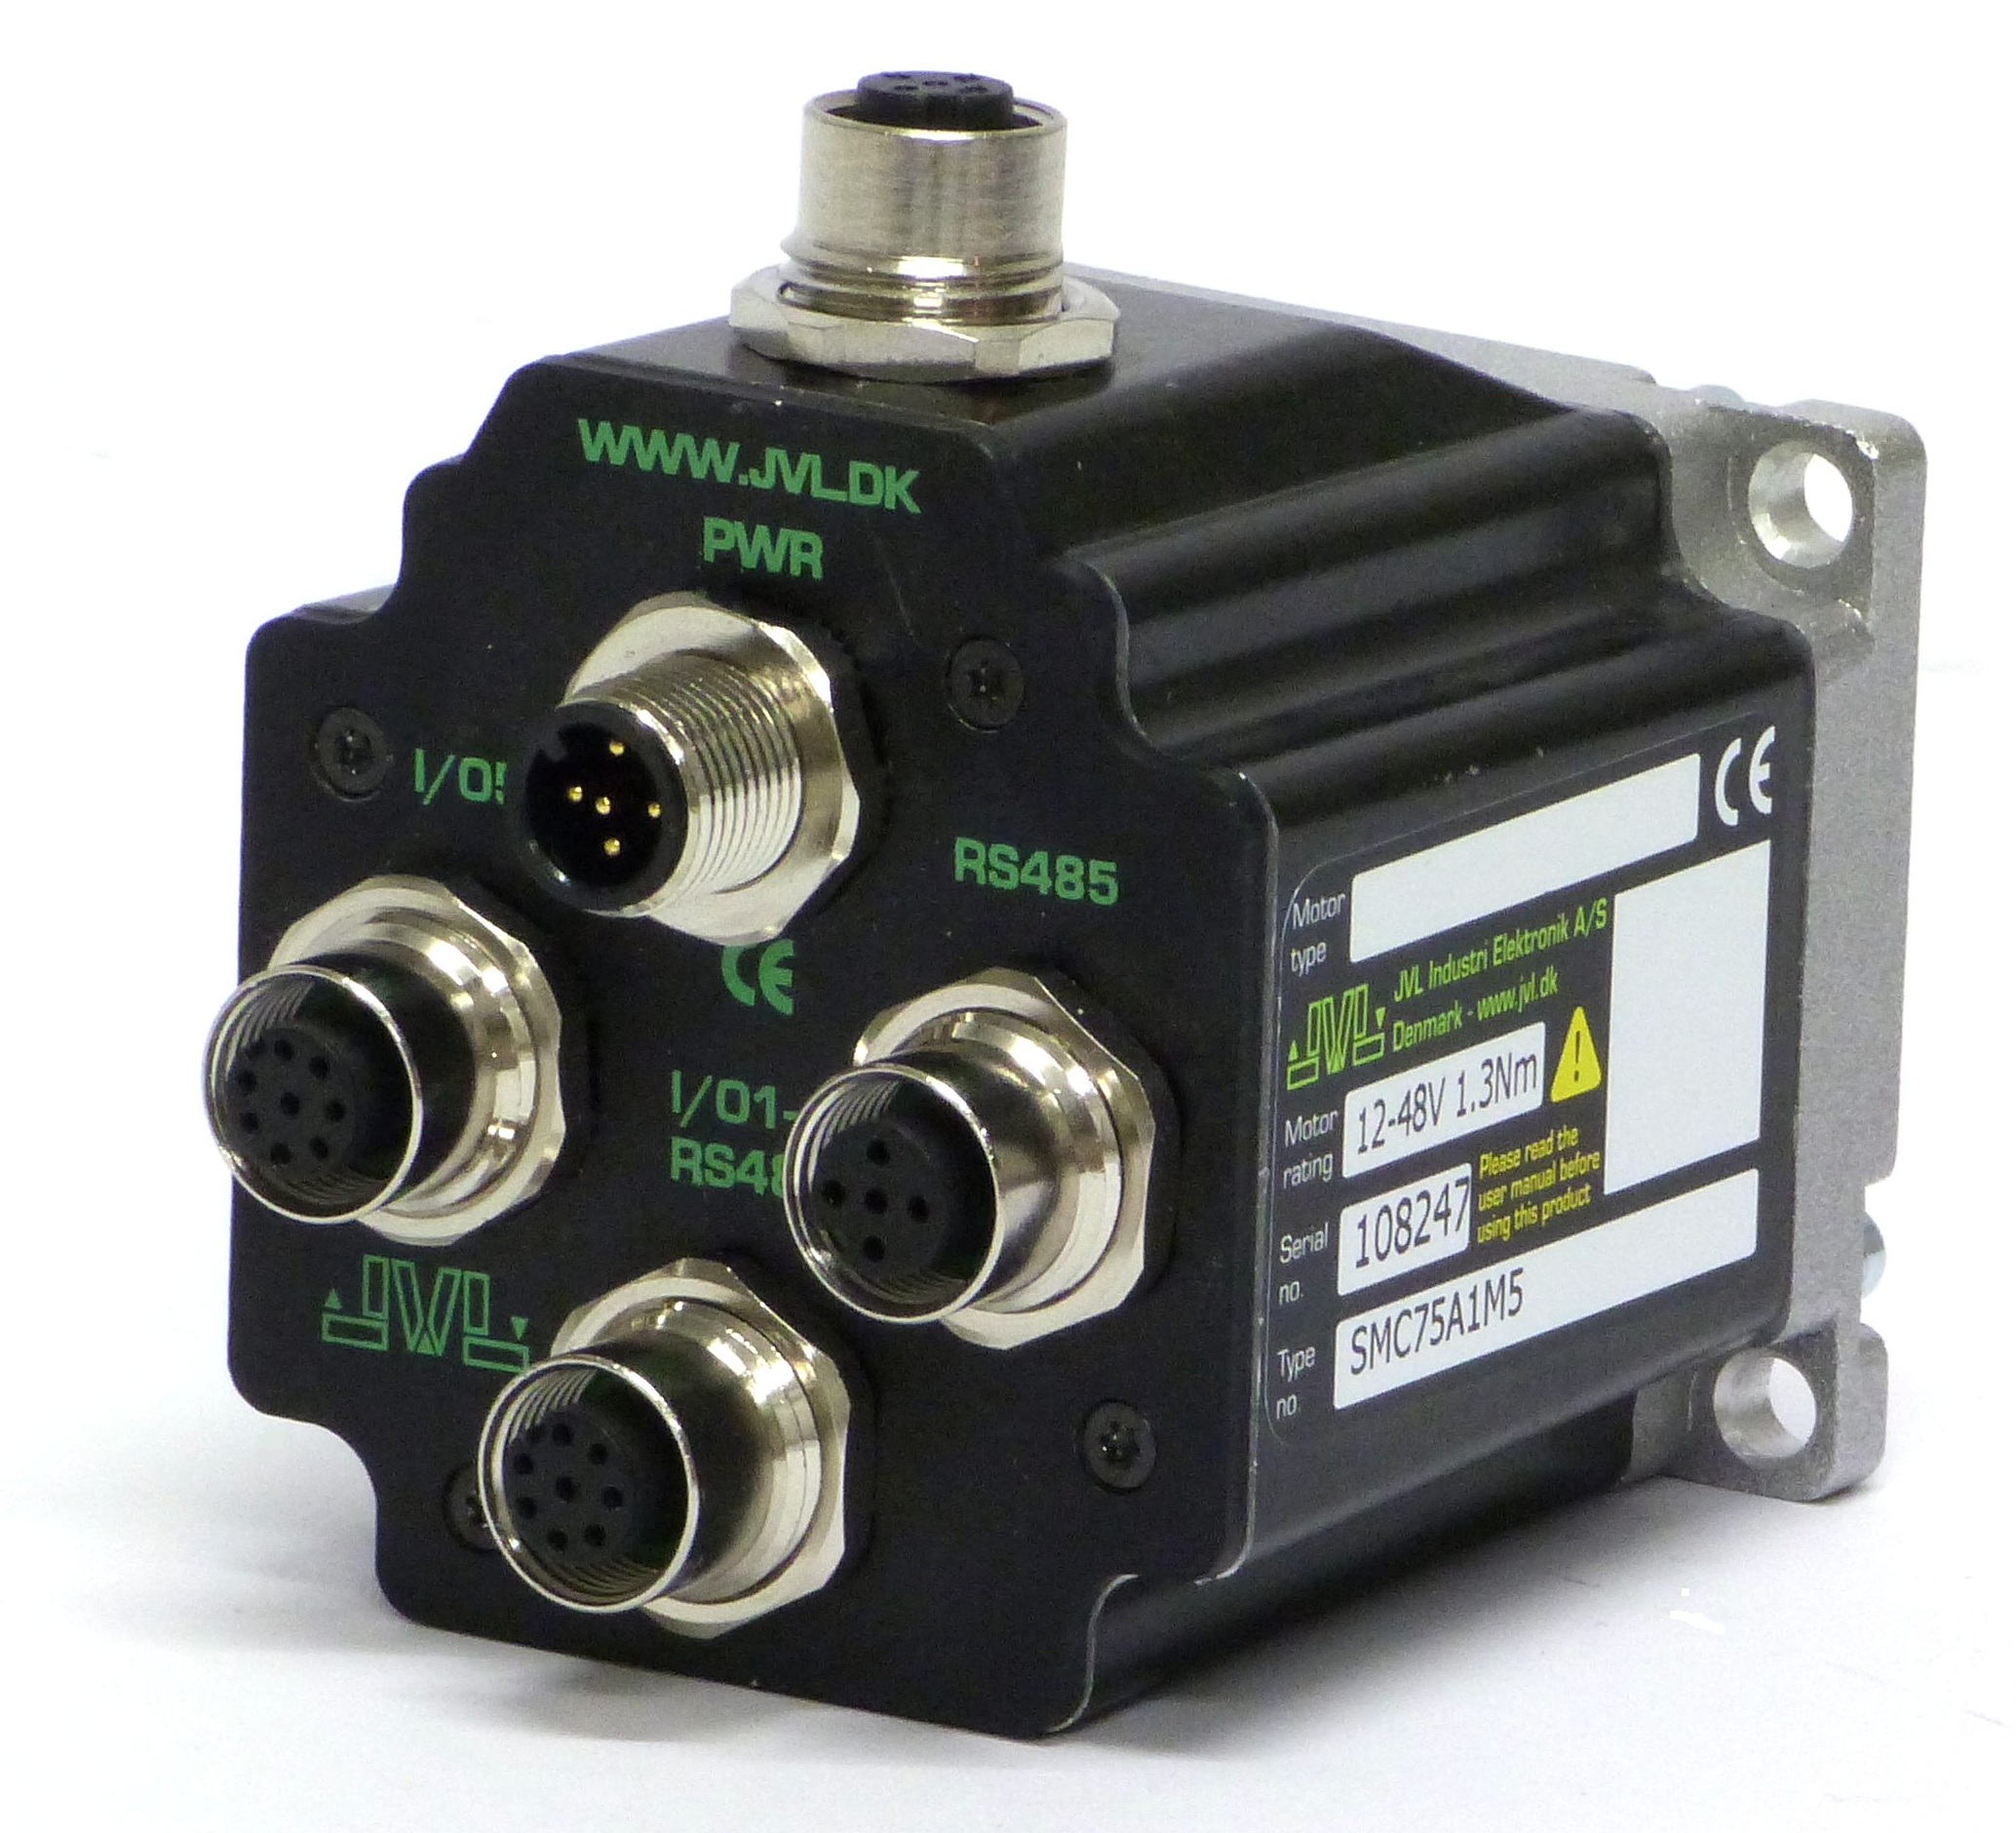 QuickStep are very compact integrated stepper motors